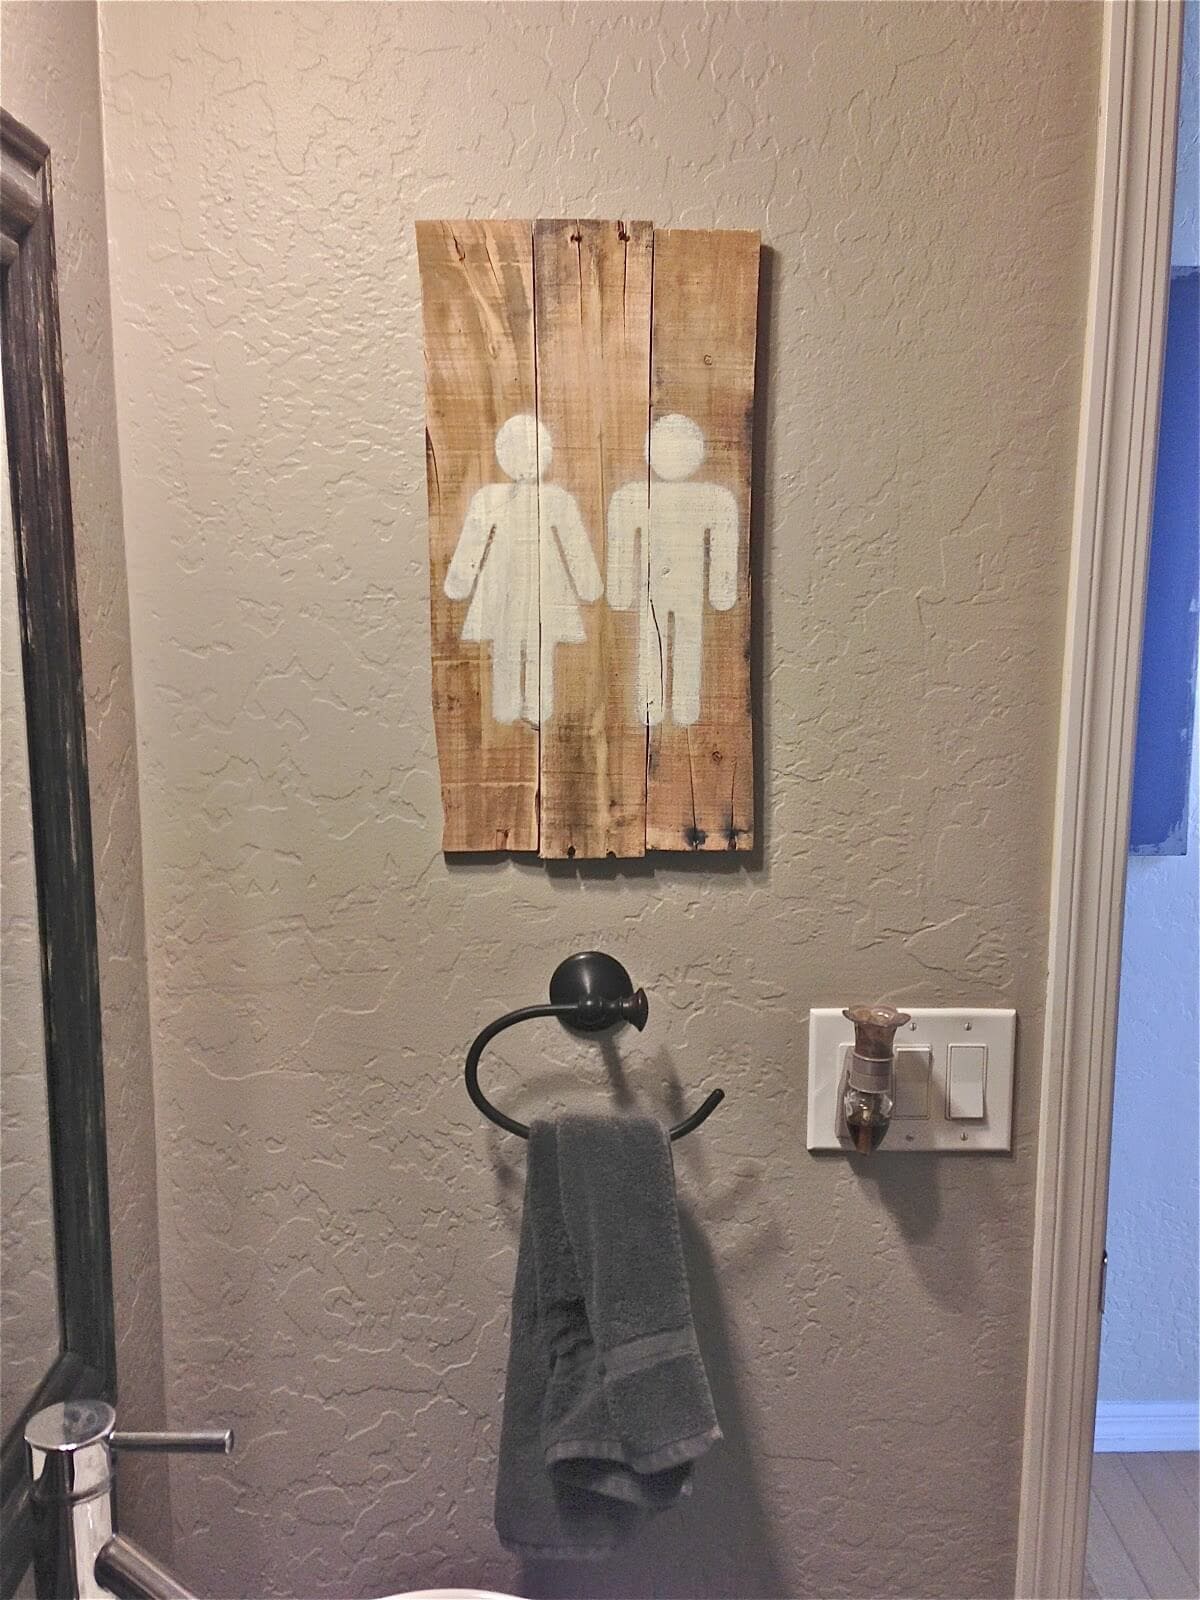 Pallet project ideas to decorate the bathroom - 85